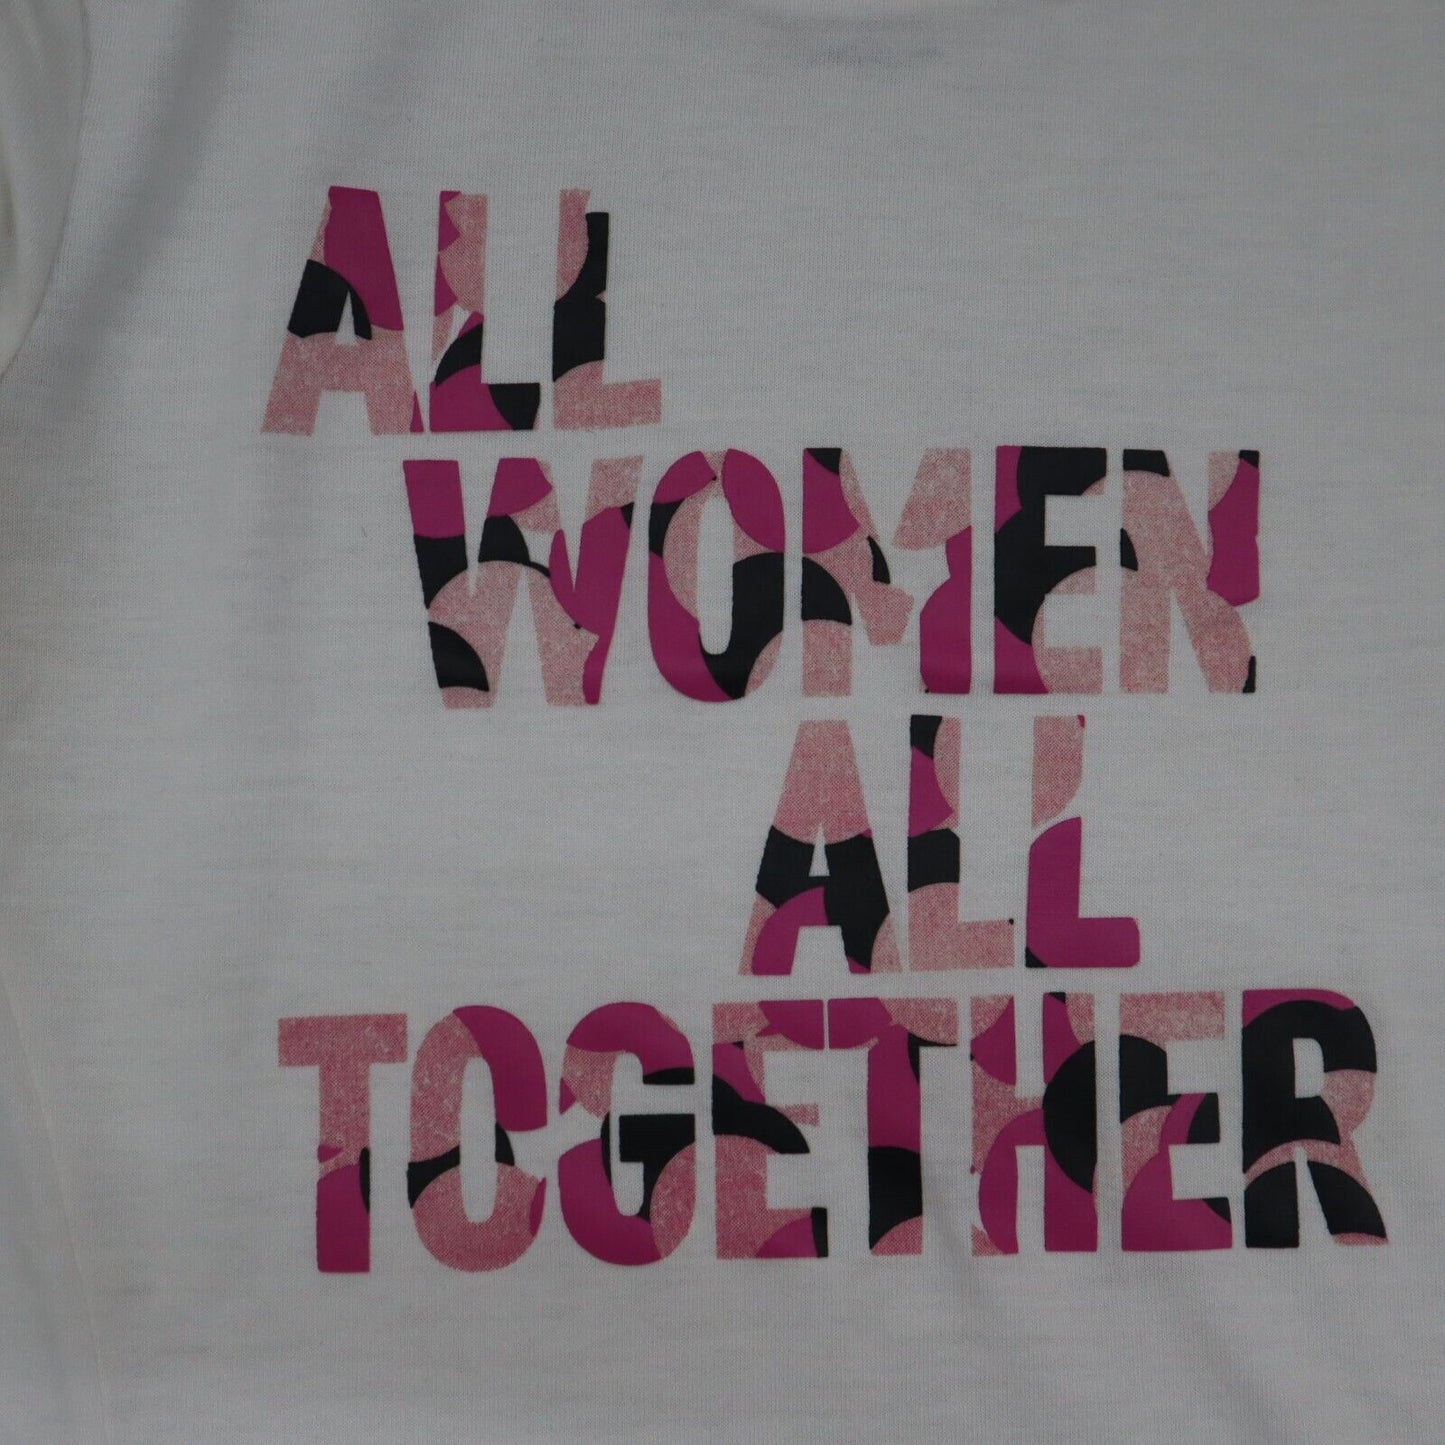 Nike Graphic T-Shirt Women's White Small Graphic All Women All Together Shirt